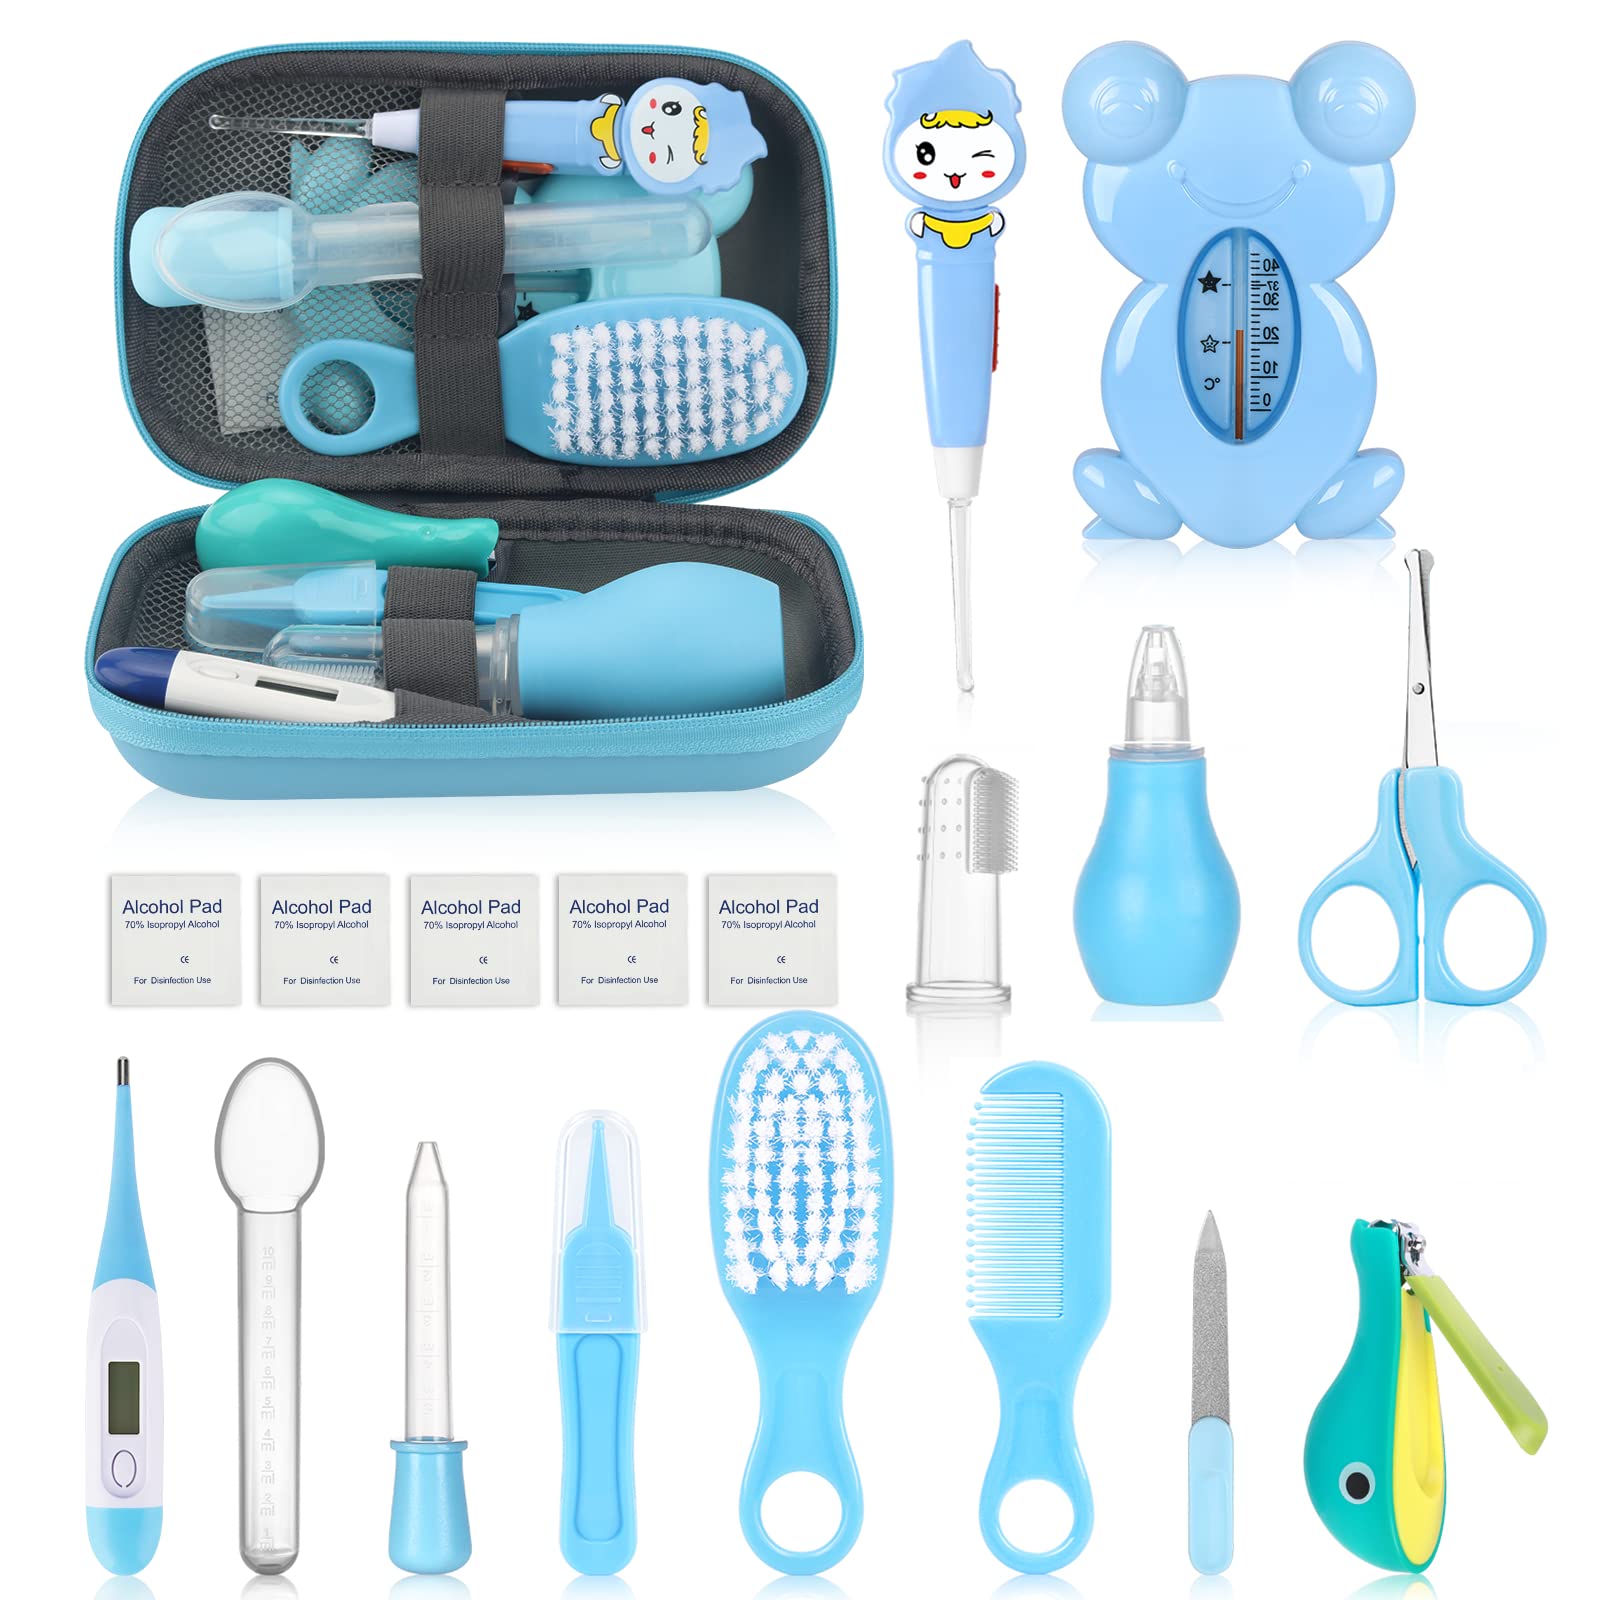 UHFi Baby Healthcare And Grooming Kit, Portable Baby Safety Care Set, Baby Essentials Kit For Newborn (Blue 18 In 1)A